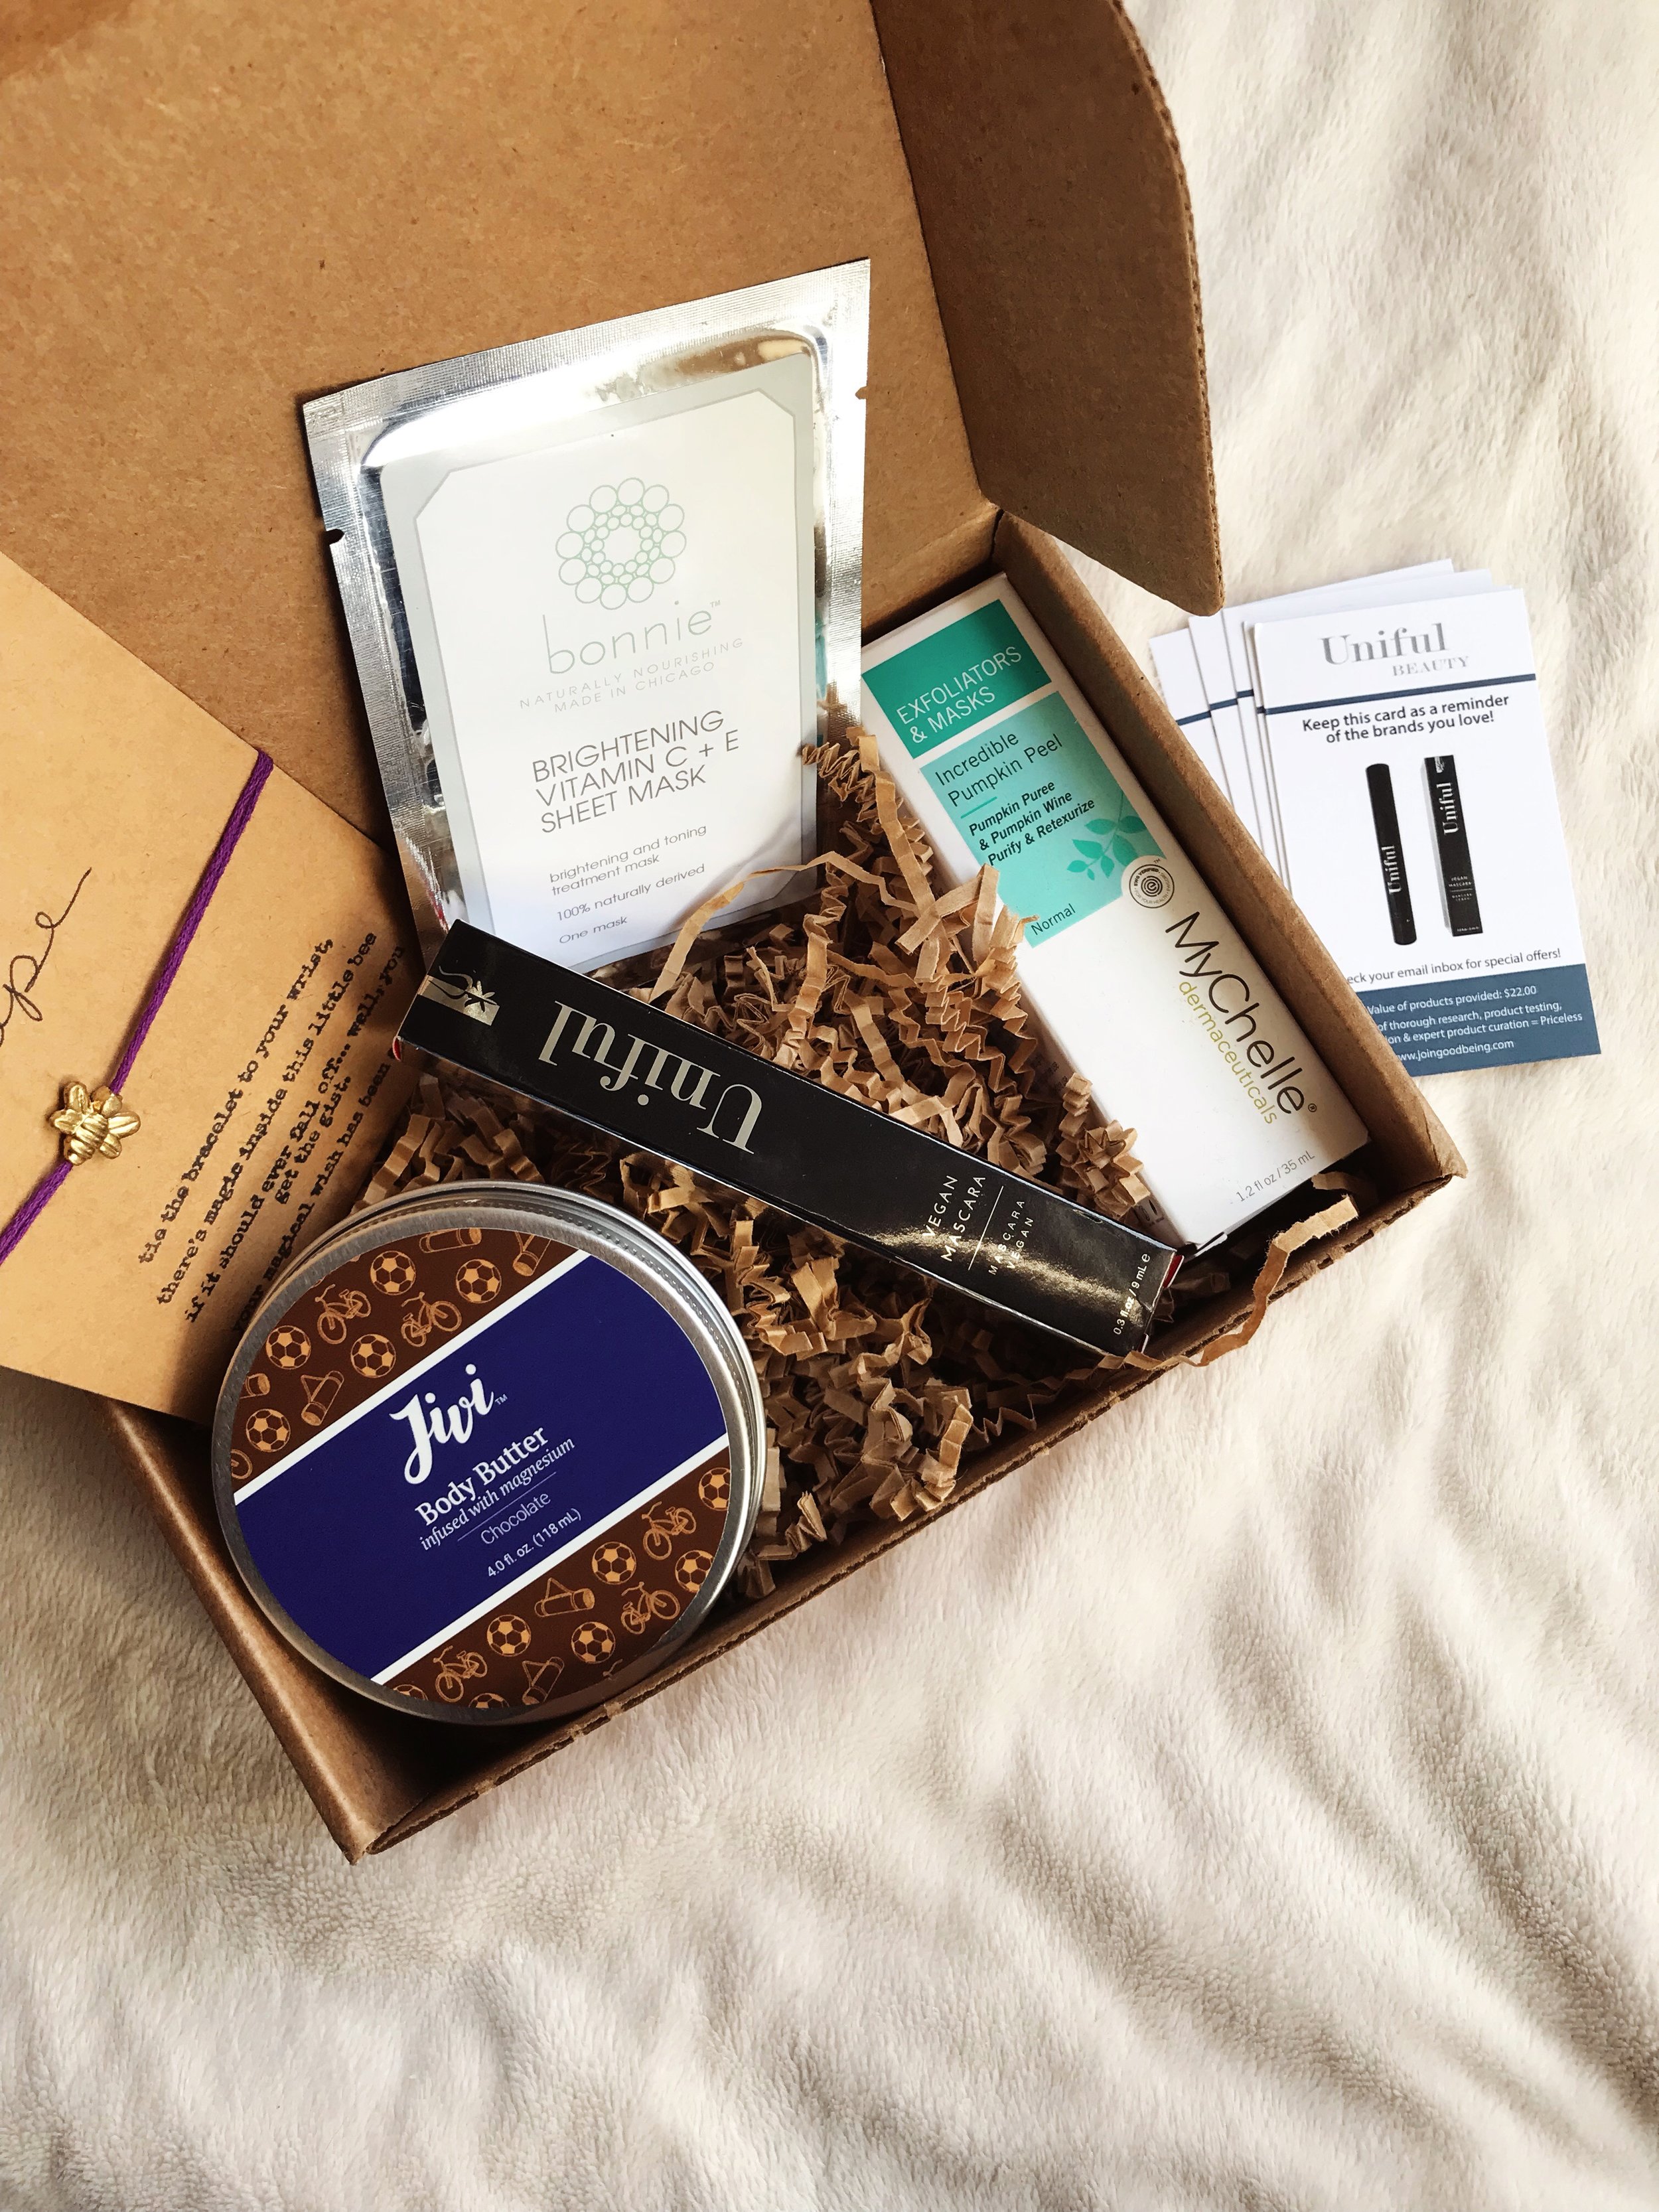 Goodbeing Green Beauty Subscription Box